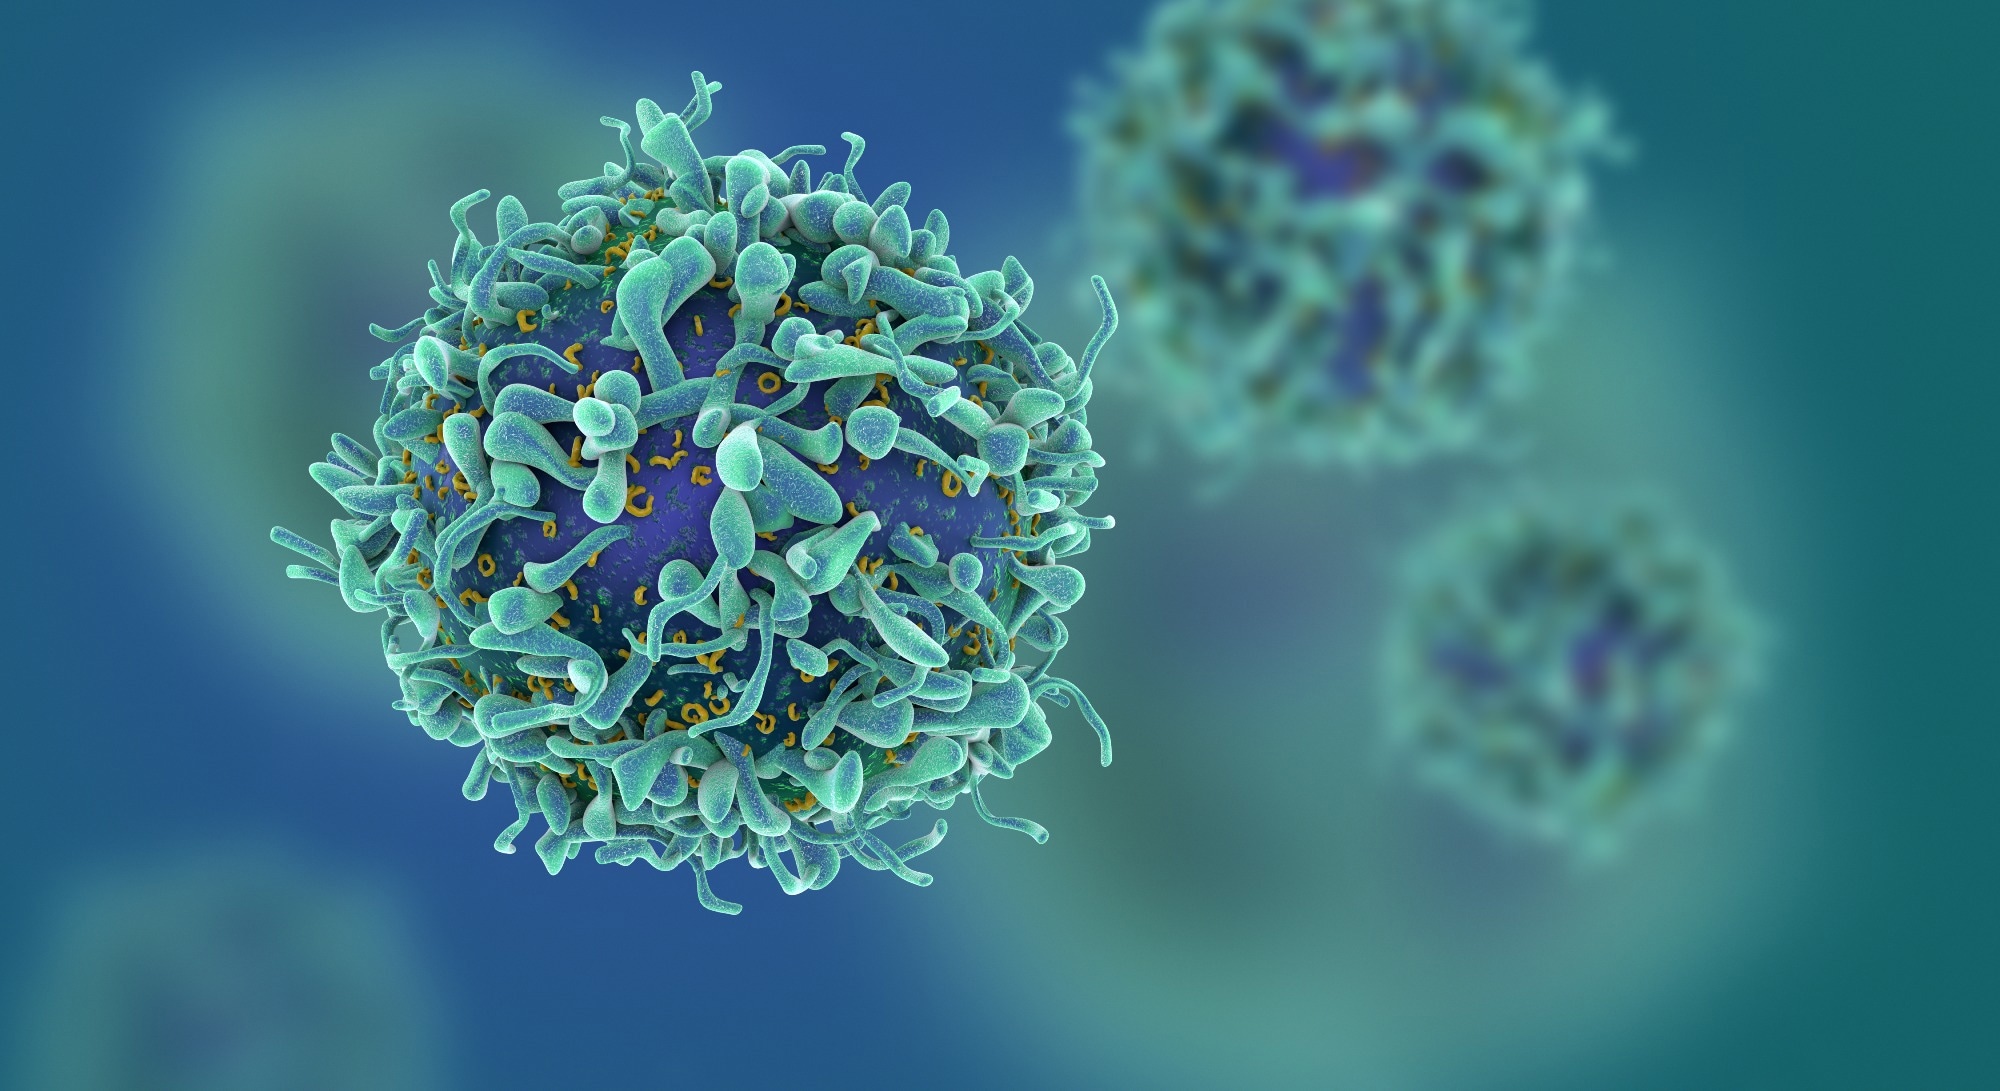 Small antiviral molecules termed assembly modulators show therapeutic efficacy against cancer